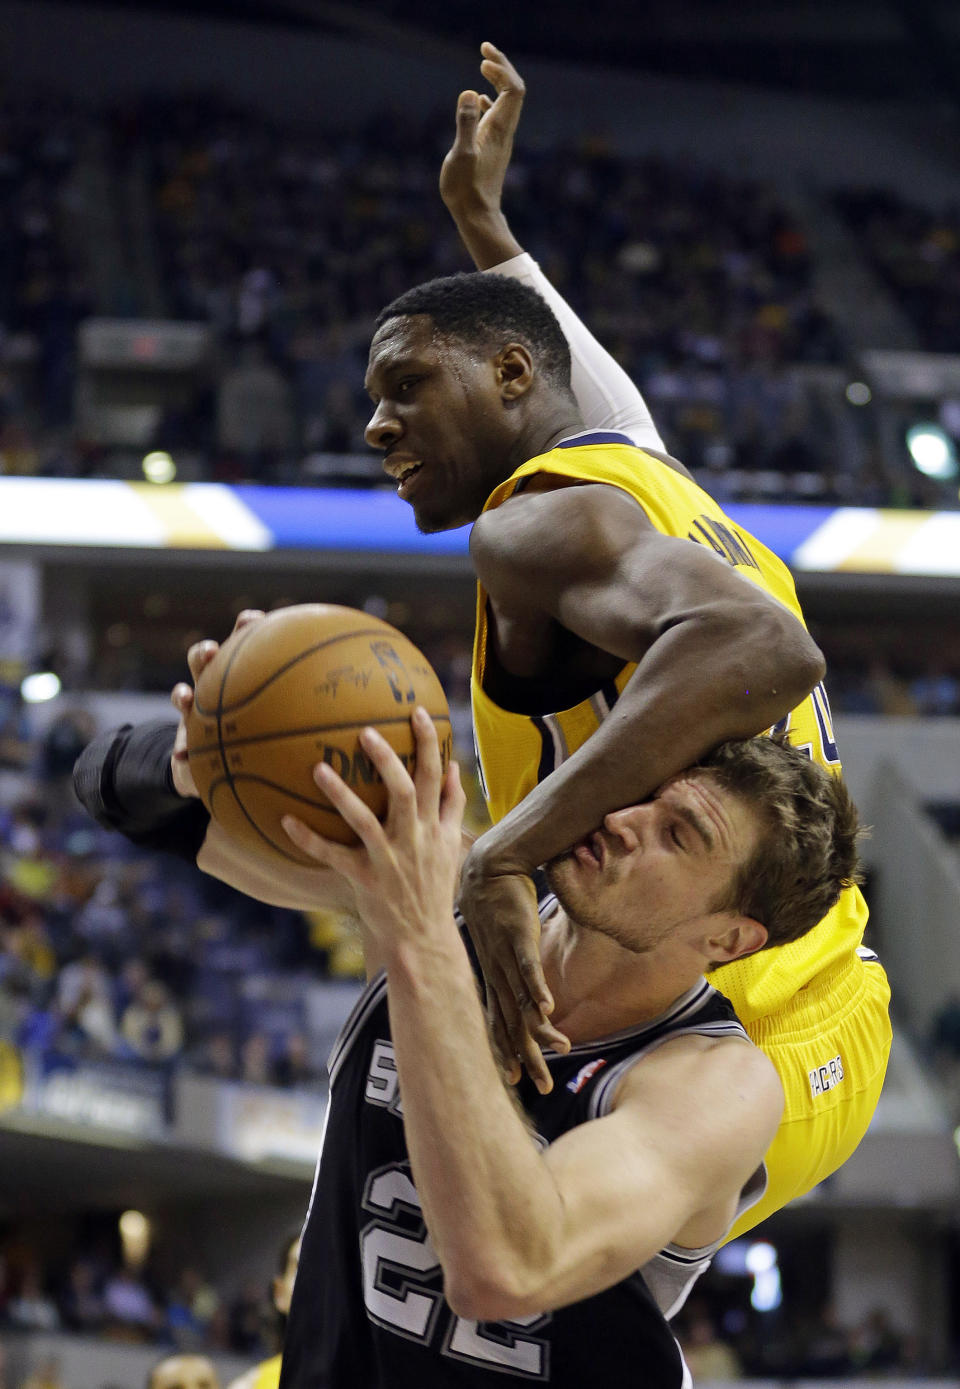 Indiana Pacers center Ian Mahinmi, top, fouls San Antonio Spurs center Tiago Splitter in the second half of an NBA basketball game in Indianapolis, Monday, March 31, 2014. The Spurs defeated the Pacers 103-77. (AP Photo/Michael Conroy)